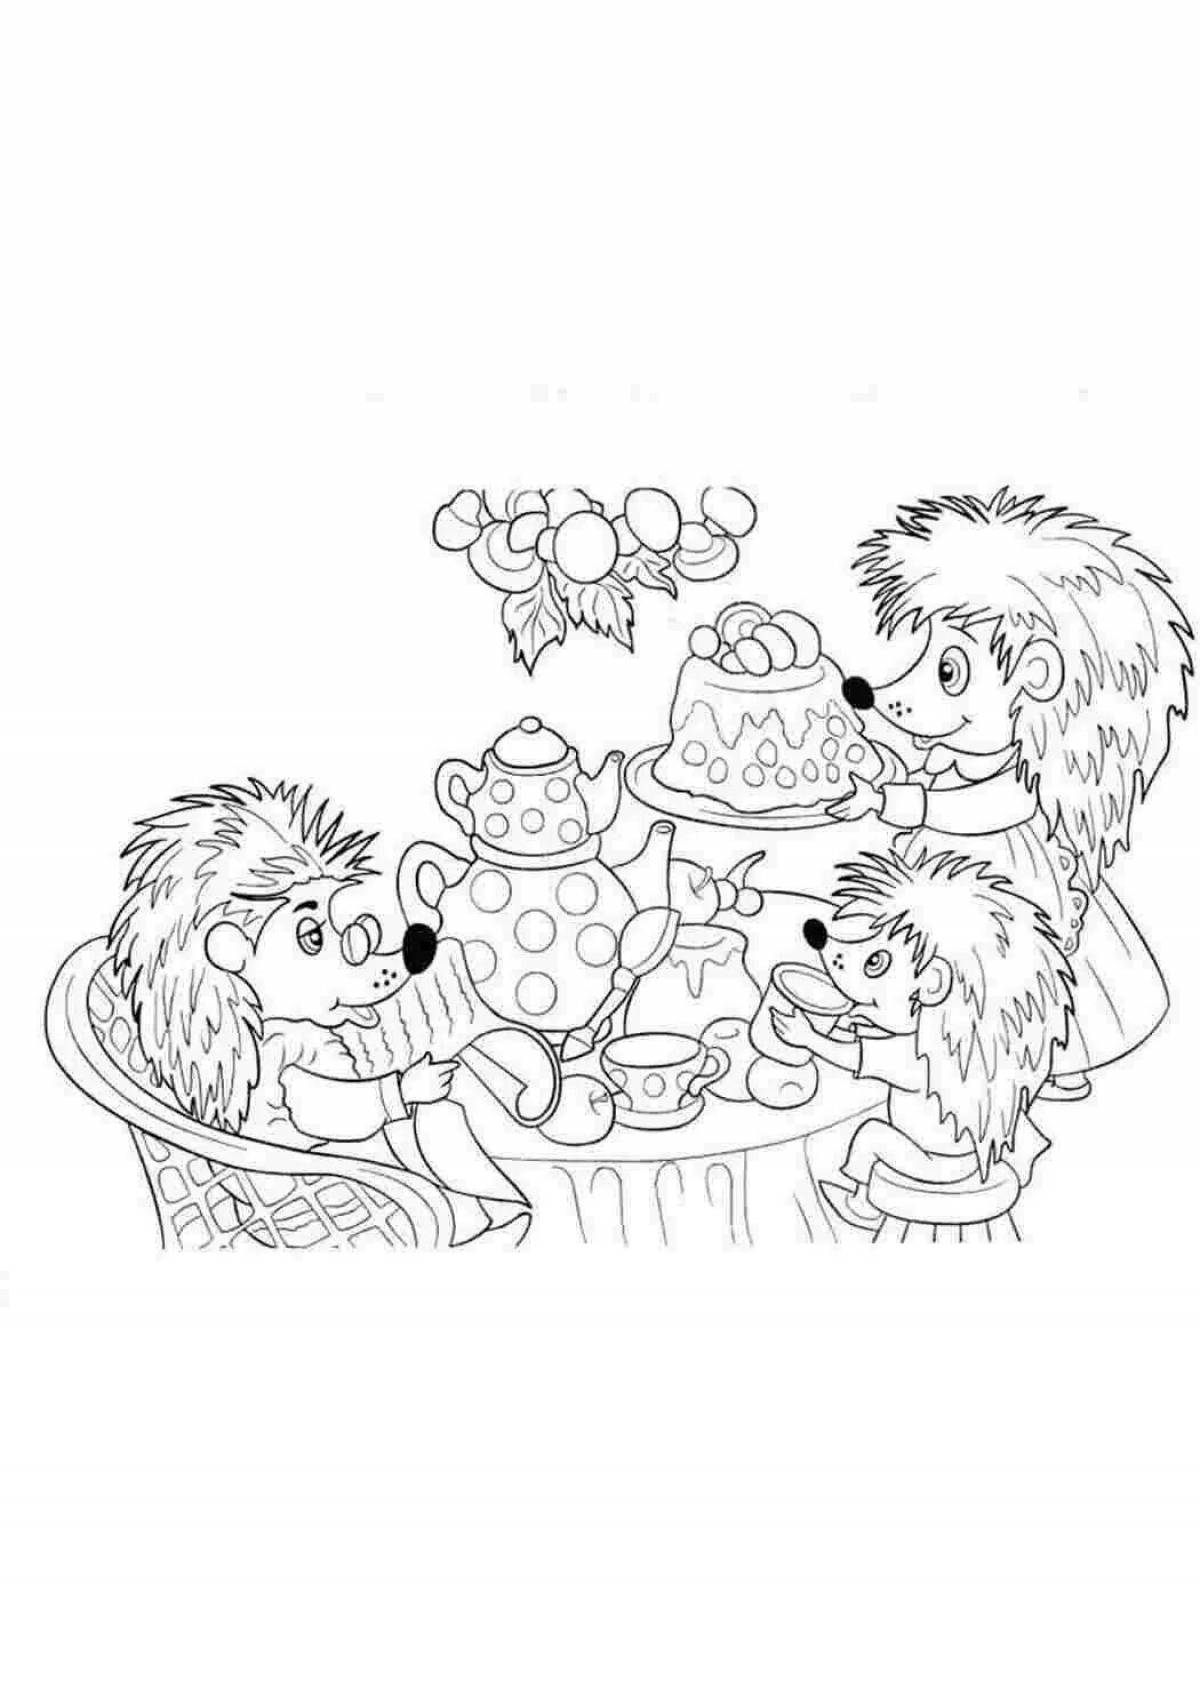 Hedgehog and teddy bear live coloring